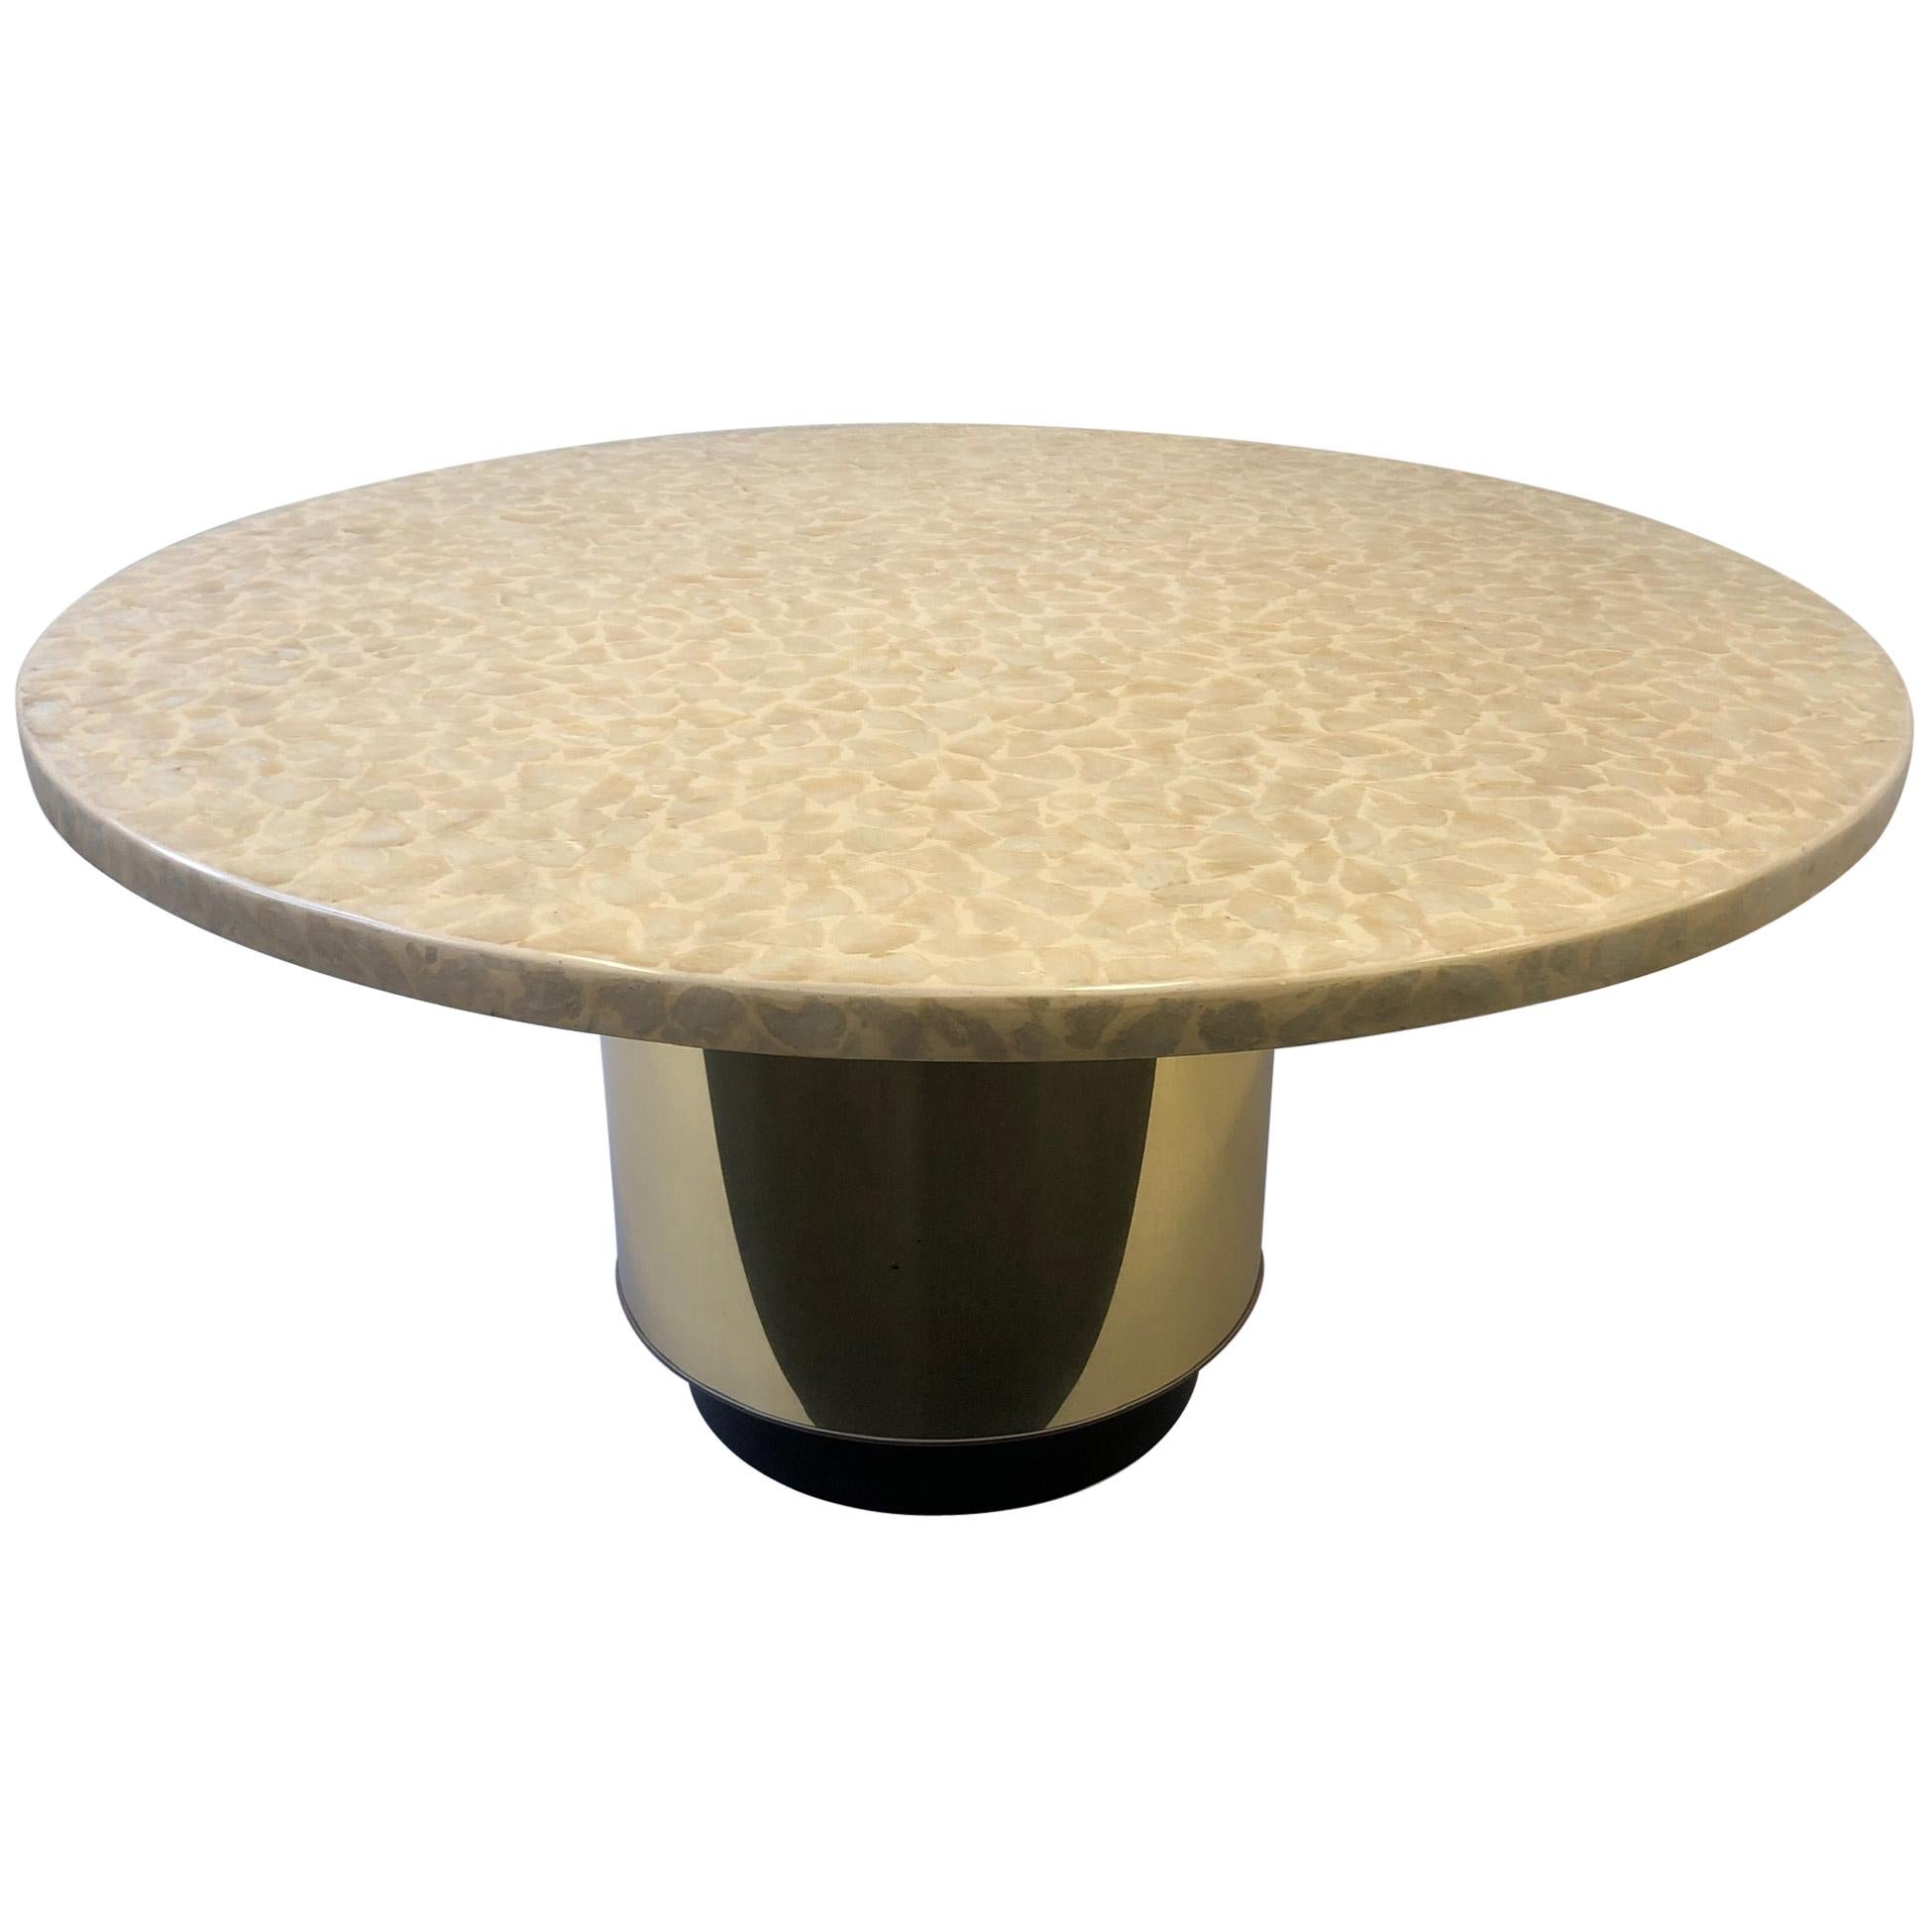 Capiz Shell and Brass Dining Table by Arthur Elrod